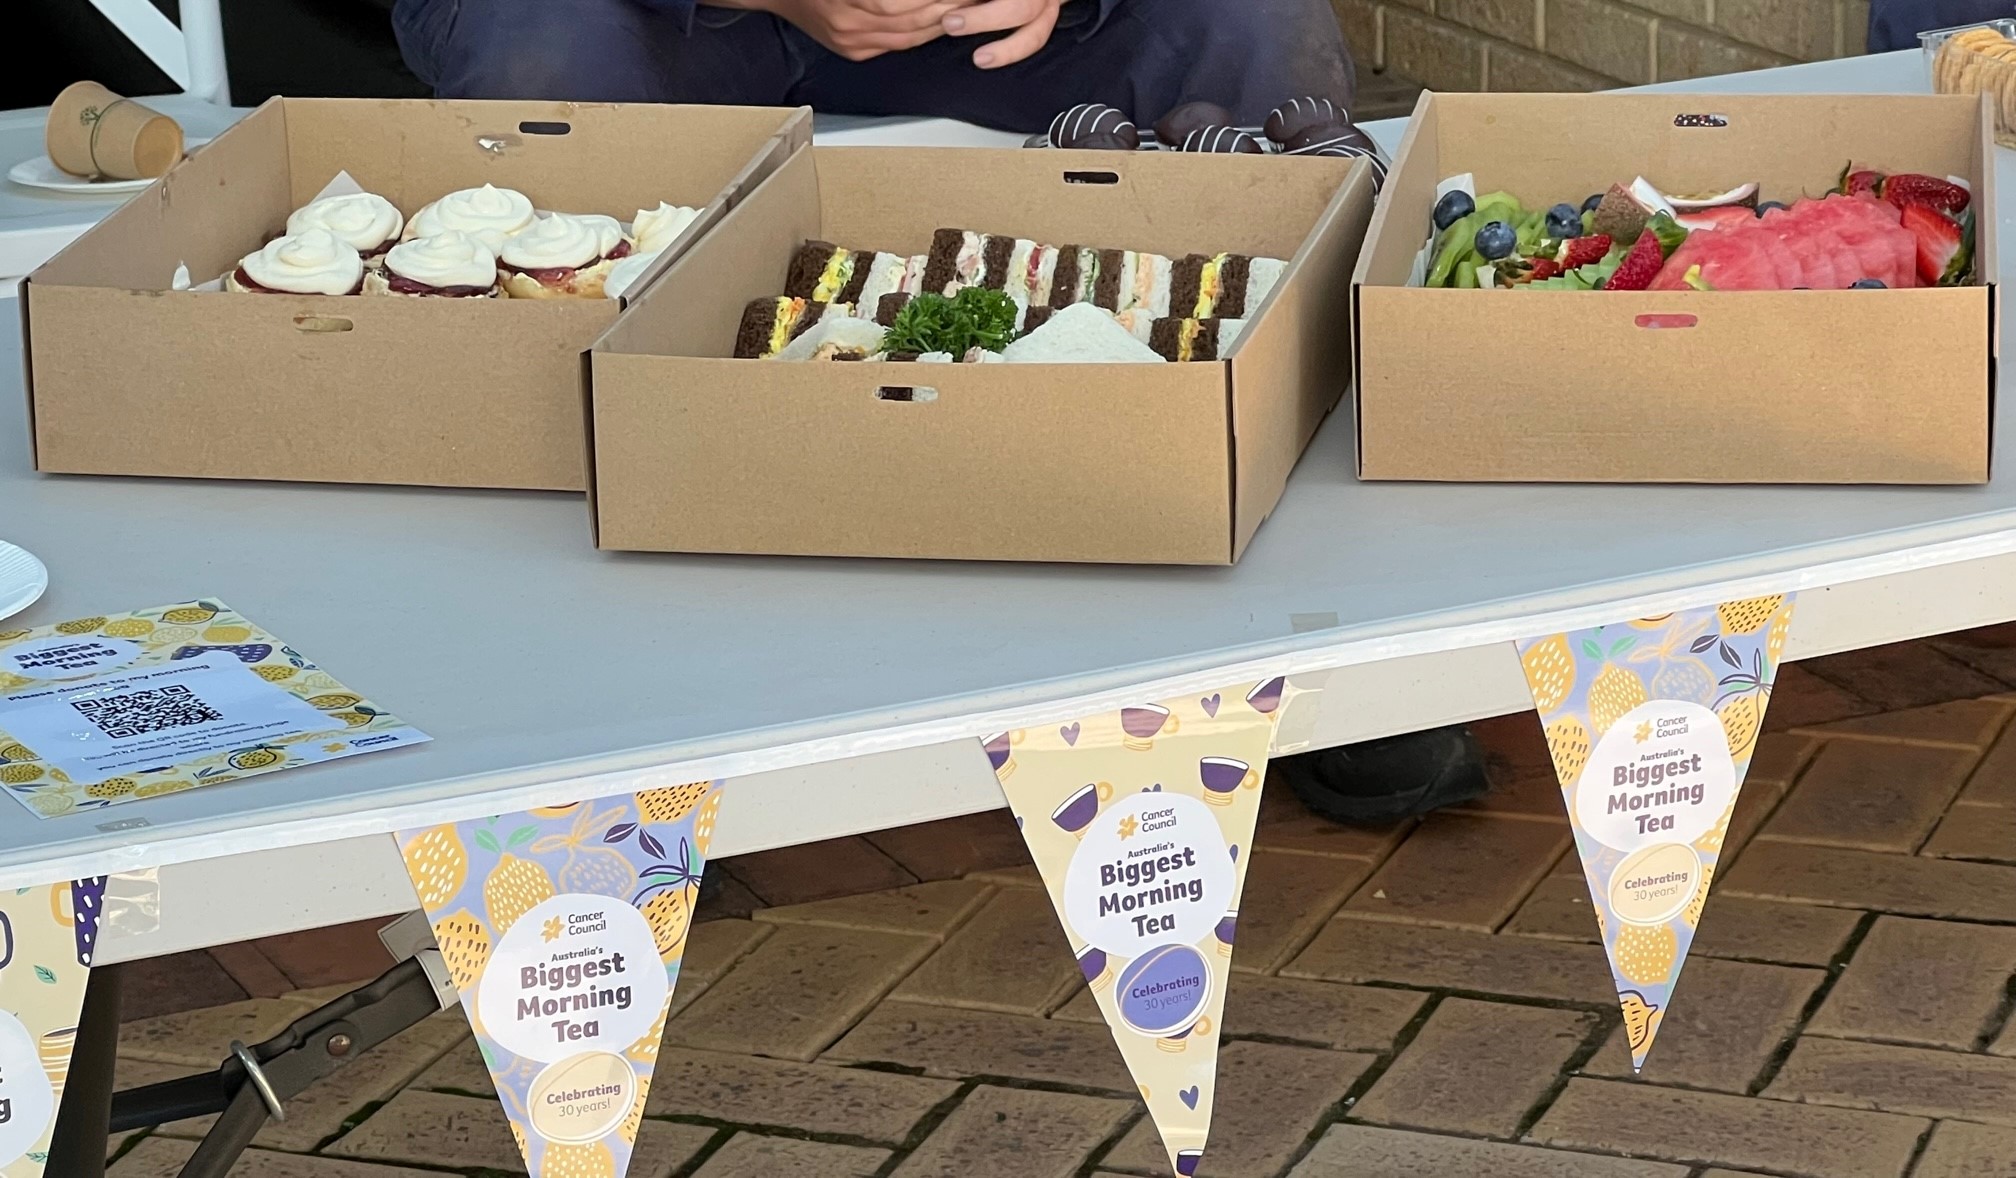 jam and cream scones, gourmet sandwiches and a selection of summer fruits in cardboard boxes in celebration of Harmony Day